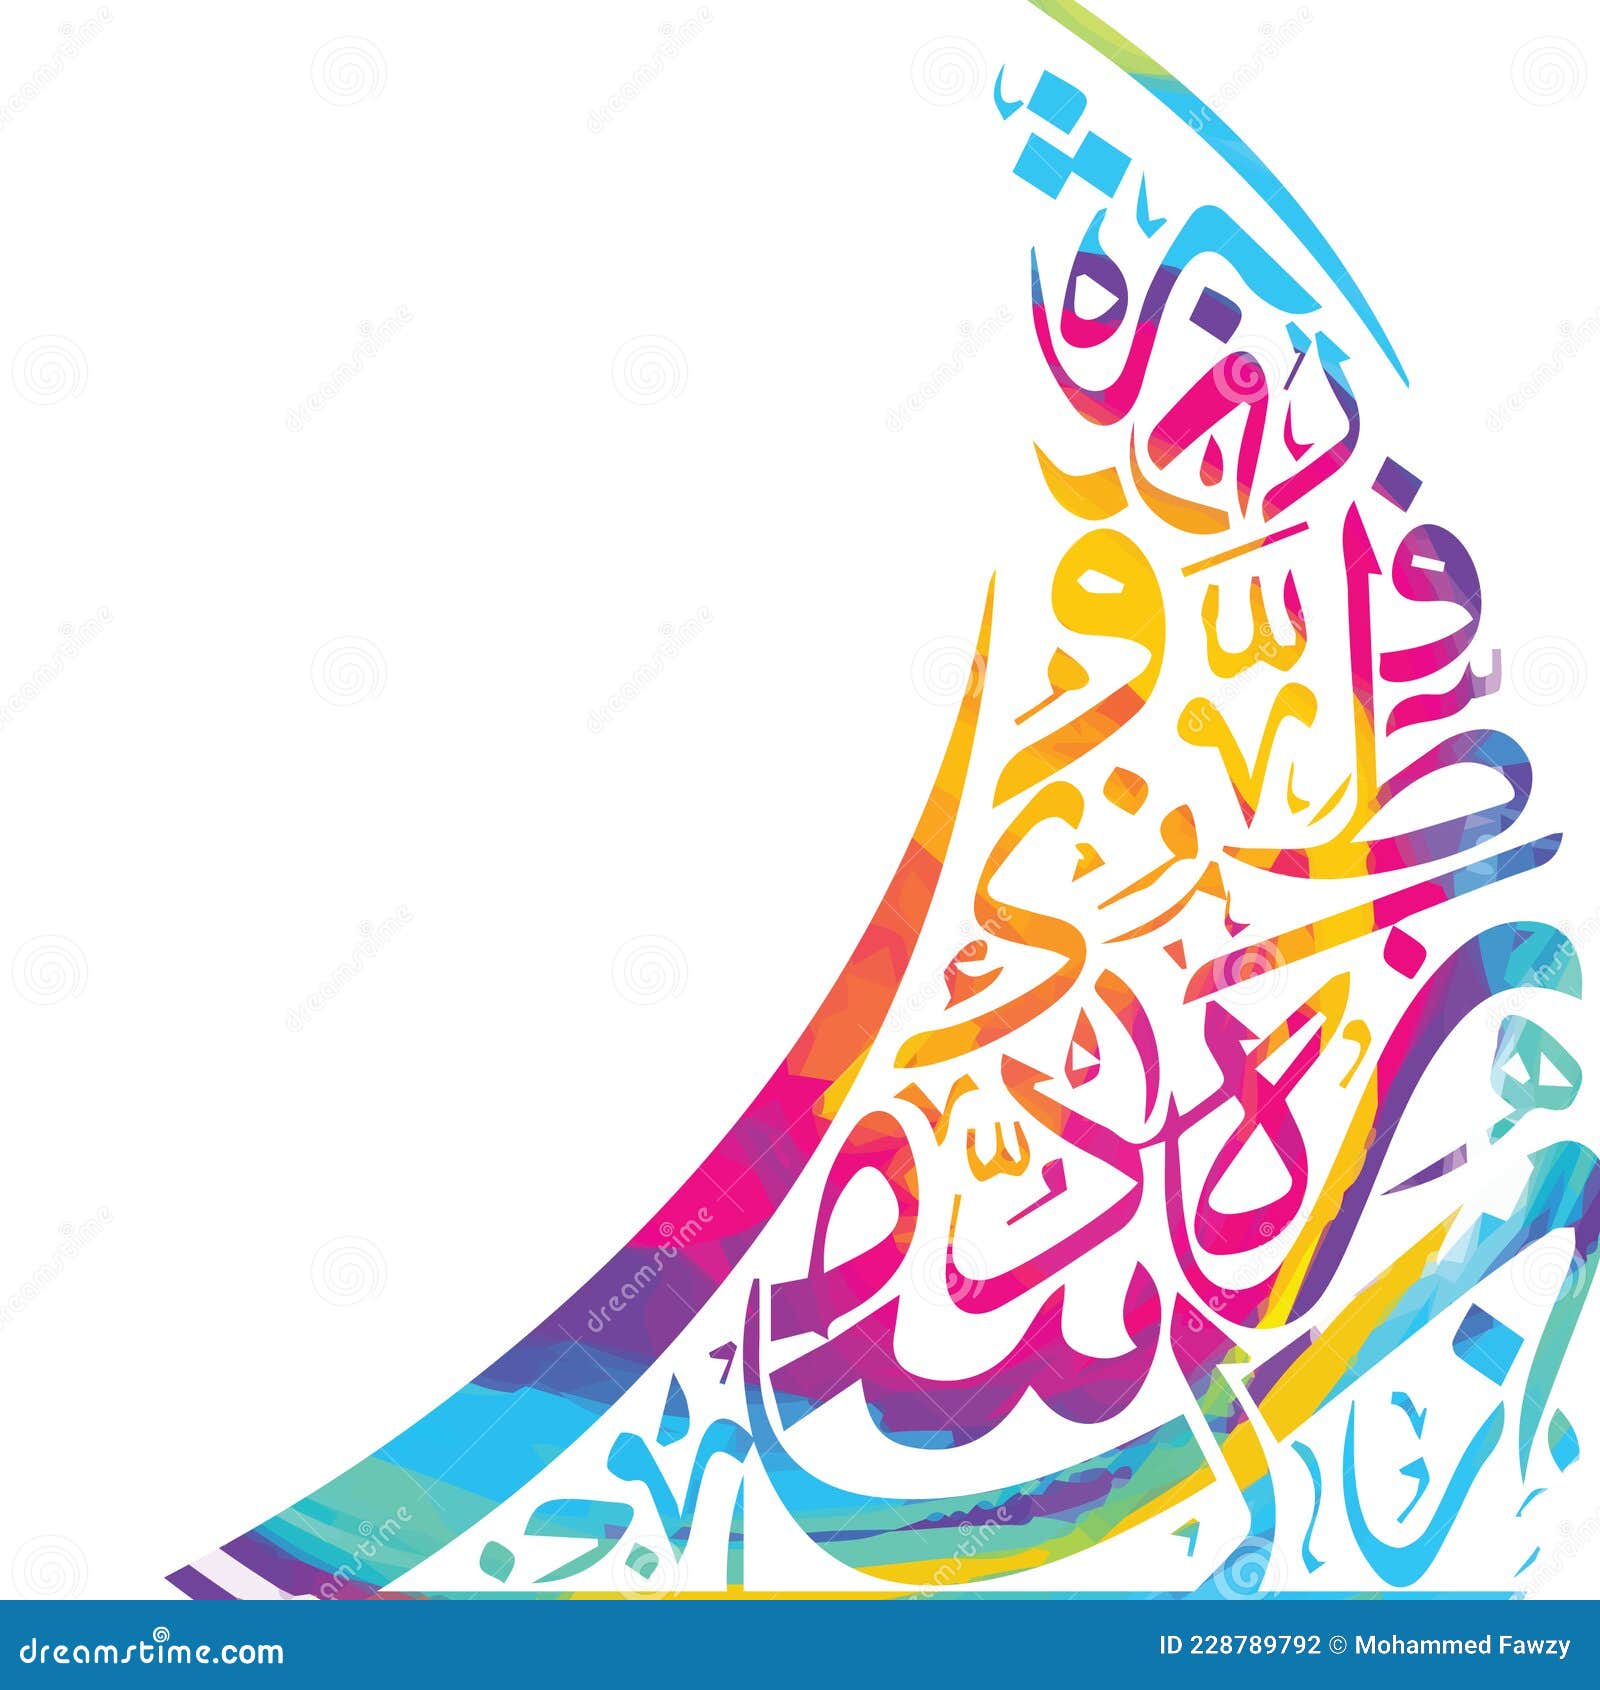 Background Abstract, Arabic Calligraphy No Particular Meaning in English,  Pattern. Stock Illustration - Illustration of fruits, abstract: 228789792